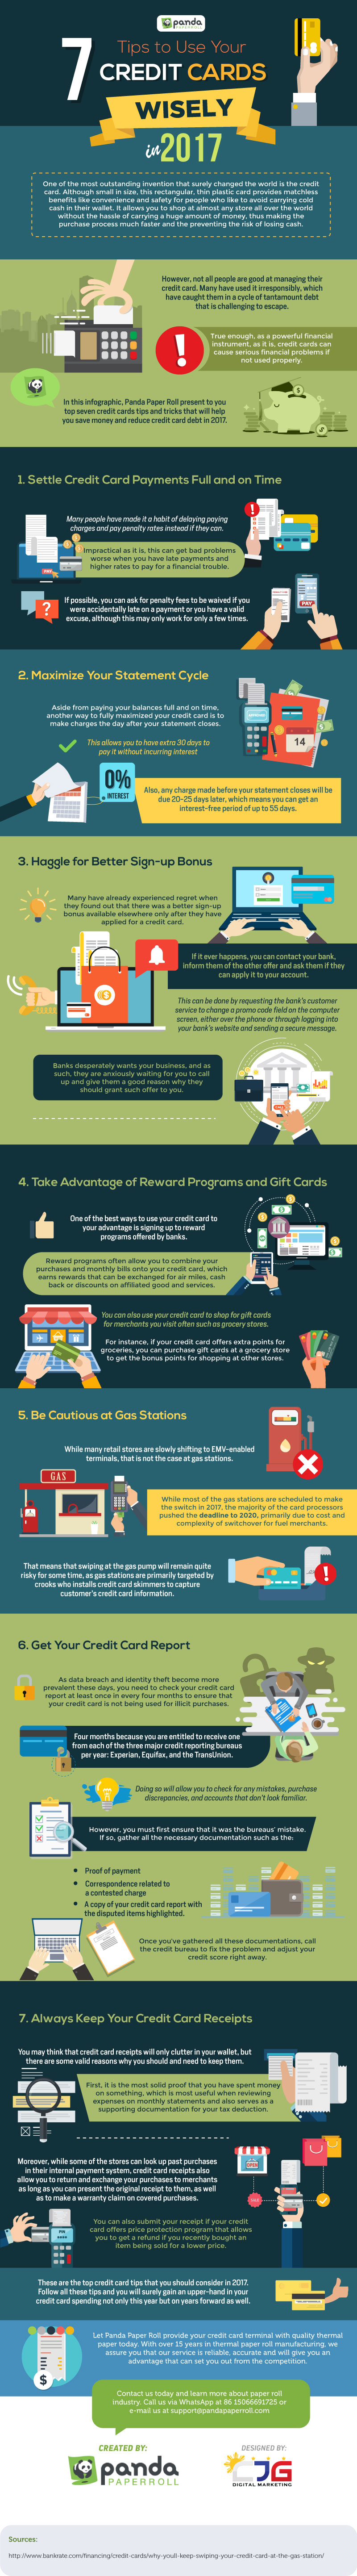 [Infographic] 7 Smart Credit Card Tips | [site:name]